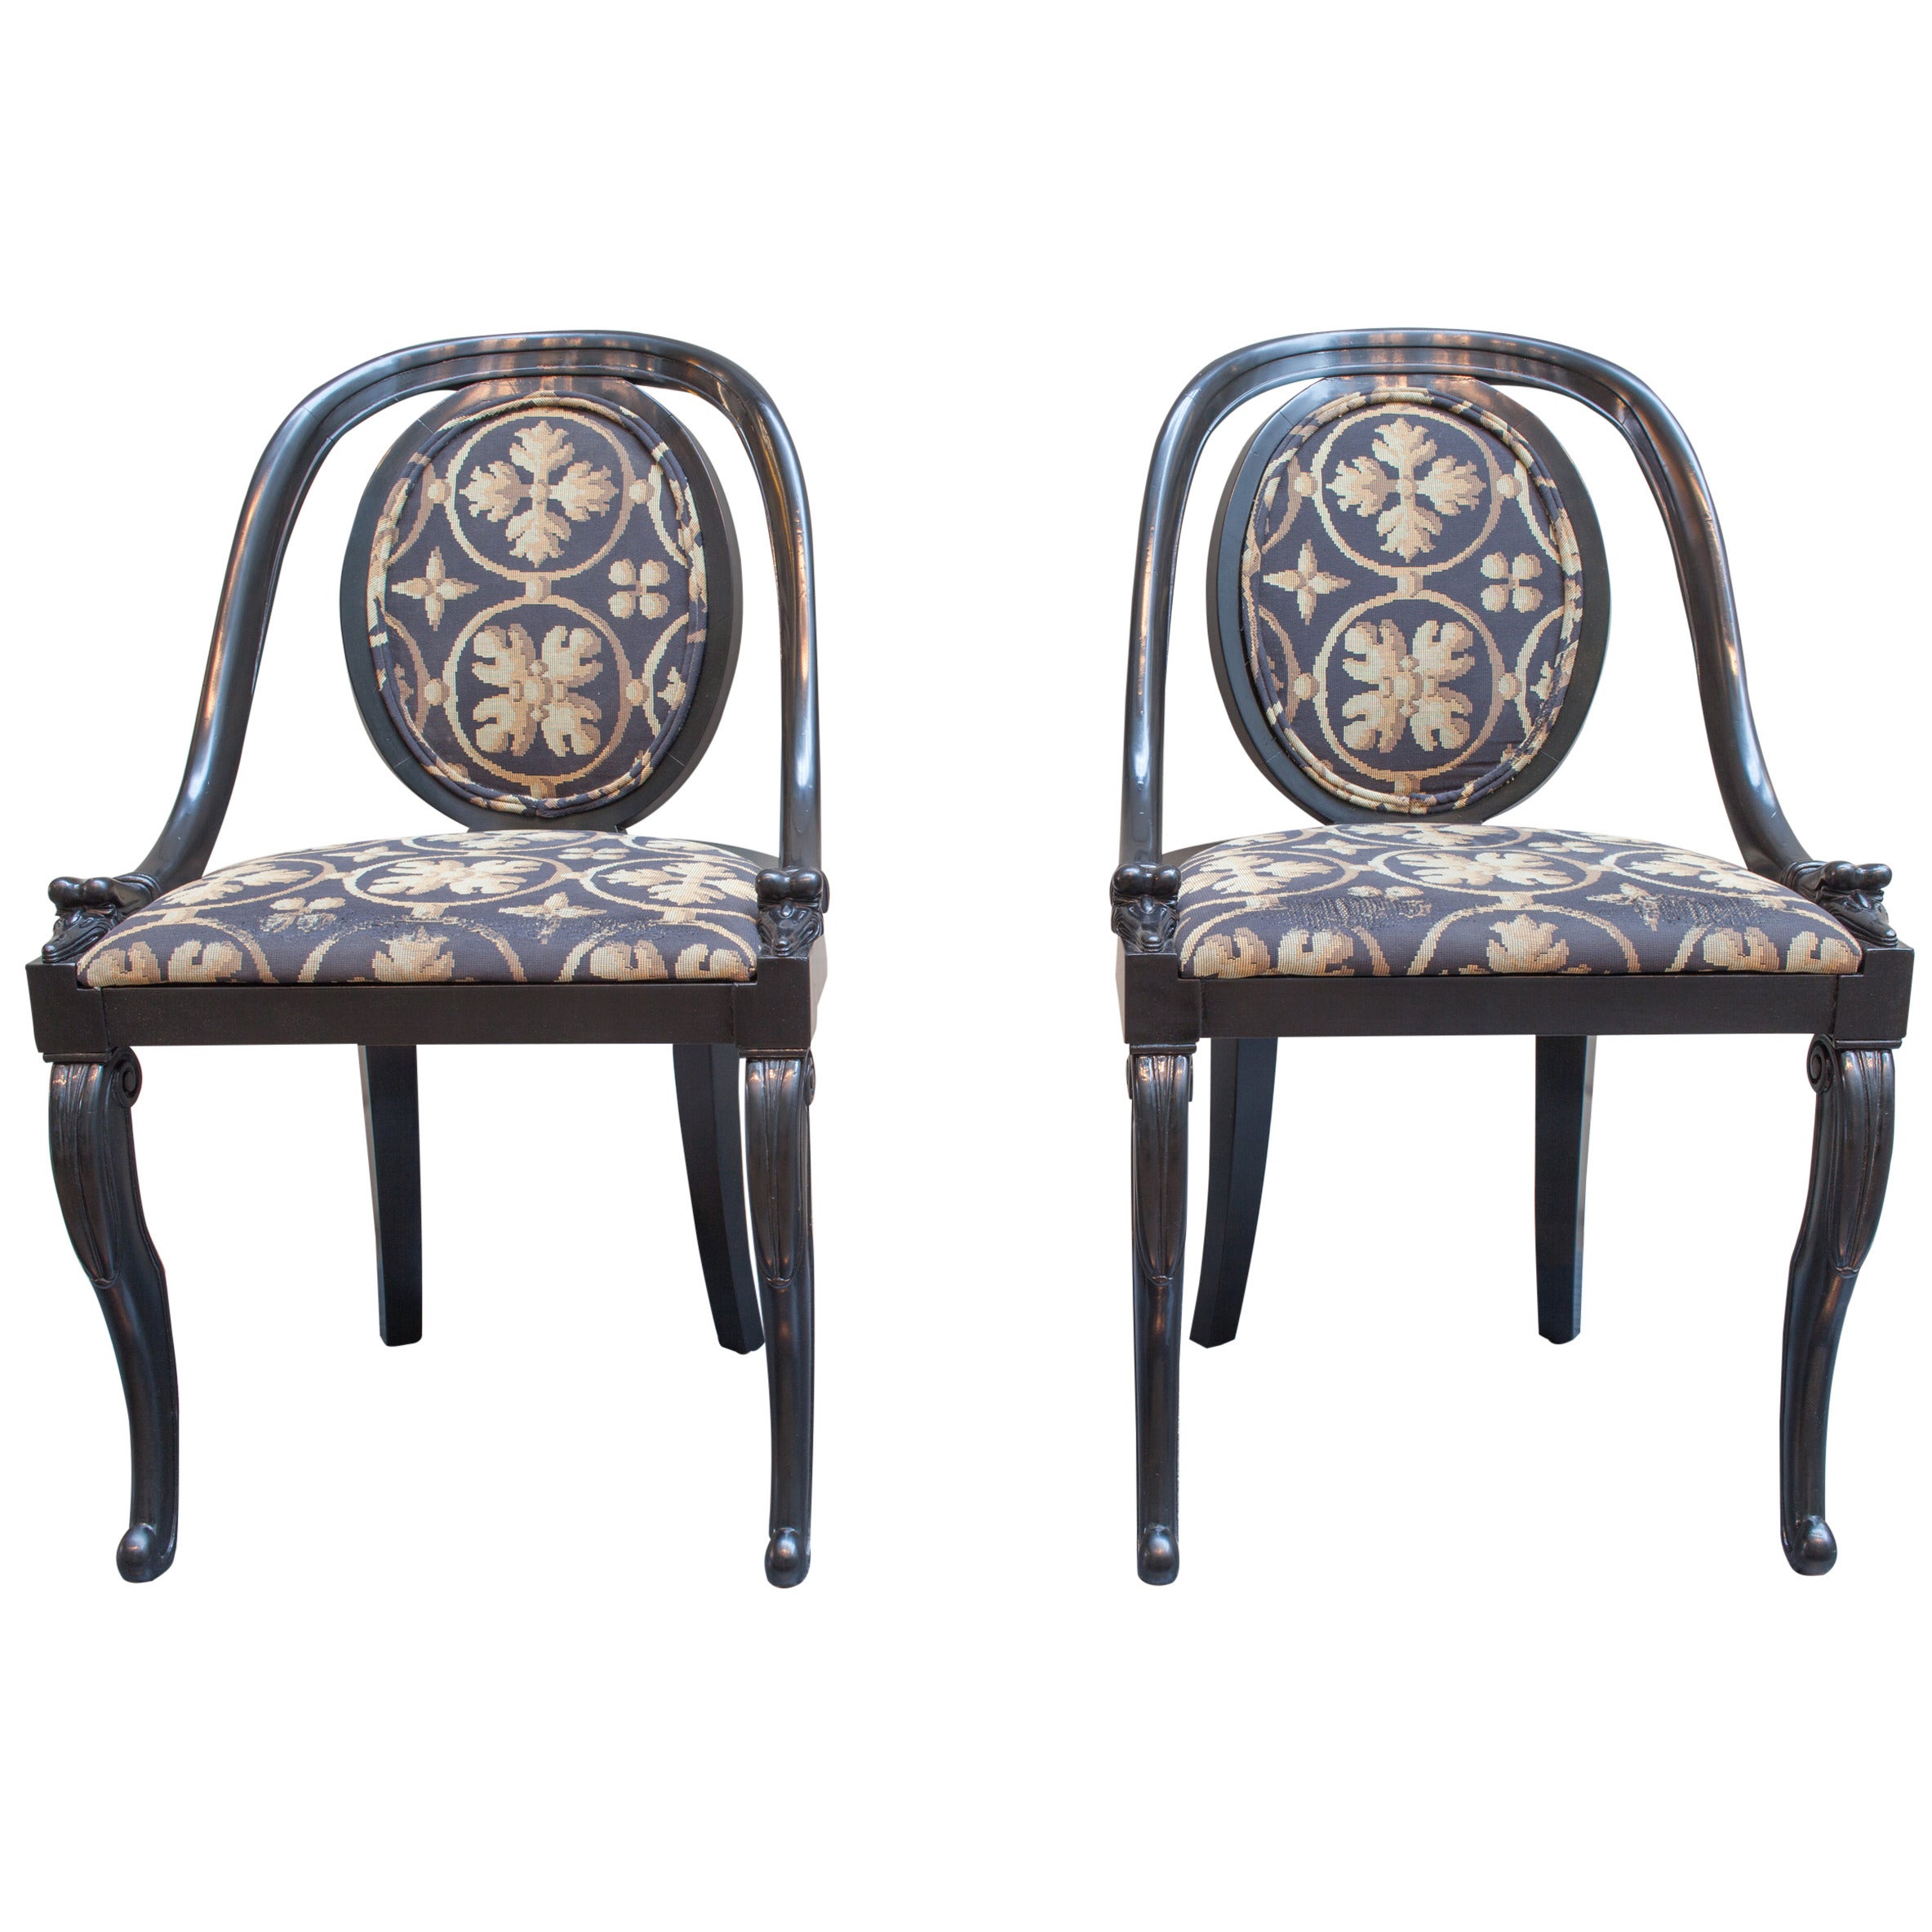 A Pair of Black Lacquer Graceful Form Chairs with Cabriole Legs